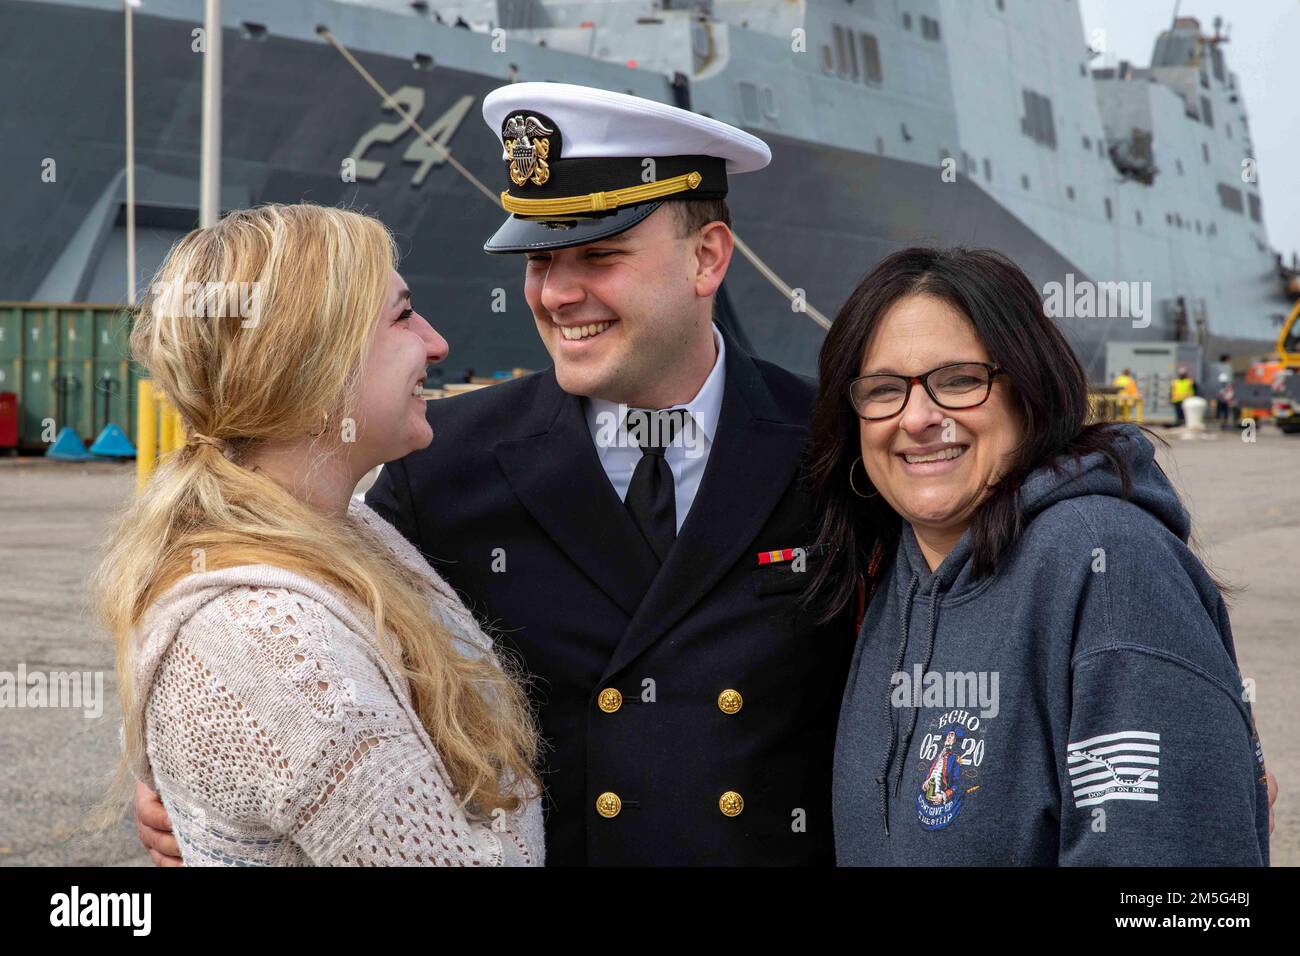 220316-N-PC065-1263 ATLANTIC OCEAN – Lt. j.g. Matthew Bonamassa, assigned to the San Antonio-class amphibious transport dock ship USS Arlington (LPD 24), poses for a photo with his mother, right, and girlfriend prior to deploying from Naval Station Norfolk, Virginia, March 16, 2022. Arlington is operating in the Atlantic Ocean in support of naval operations to maintain maritime stability and security in order to ensure access, deter aggression and defend U.S. allied and partner interests. Stock Photo